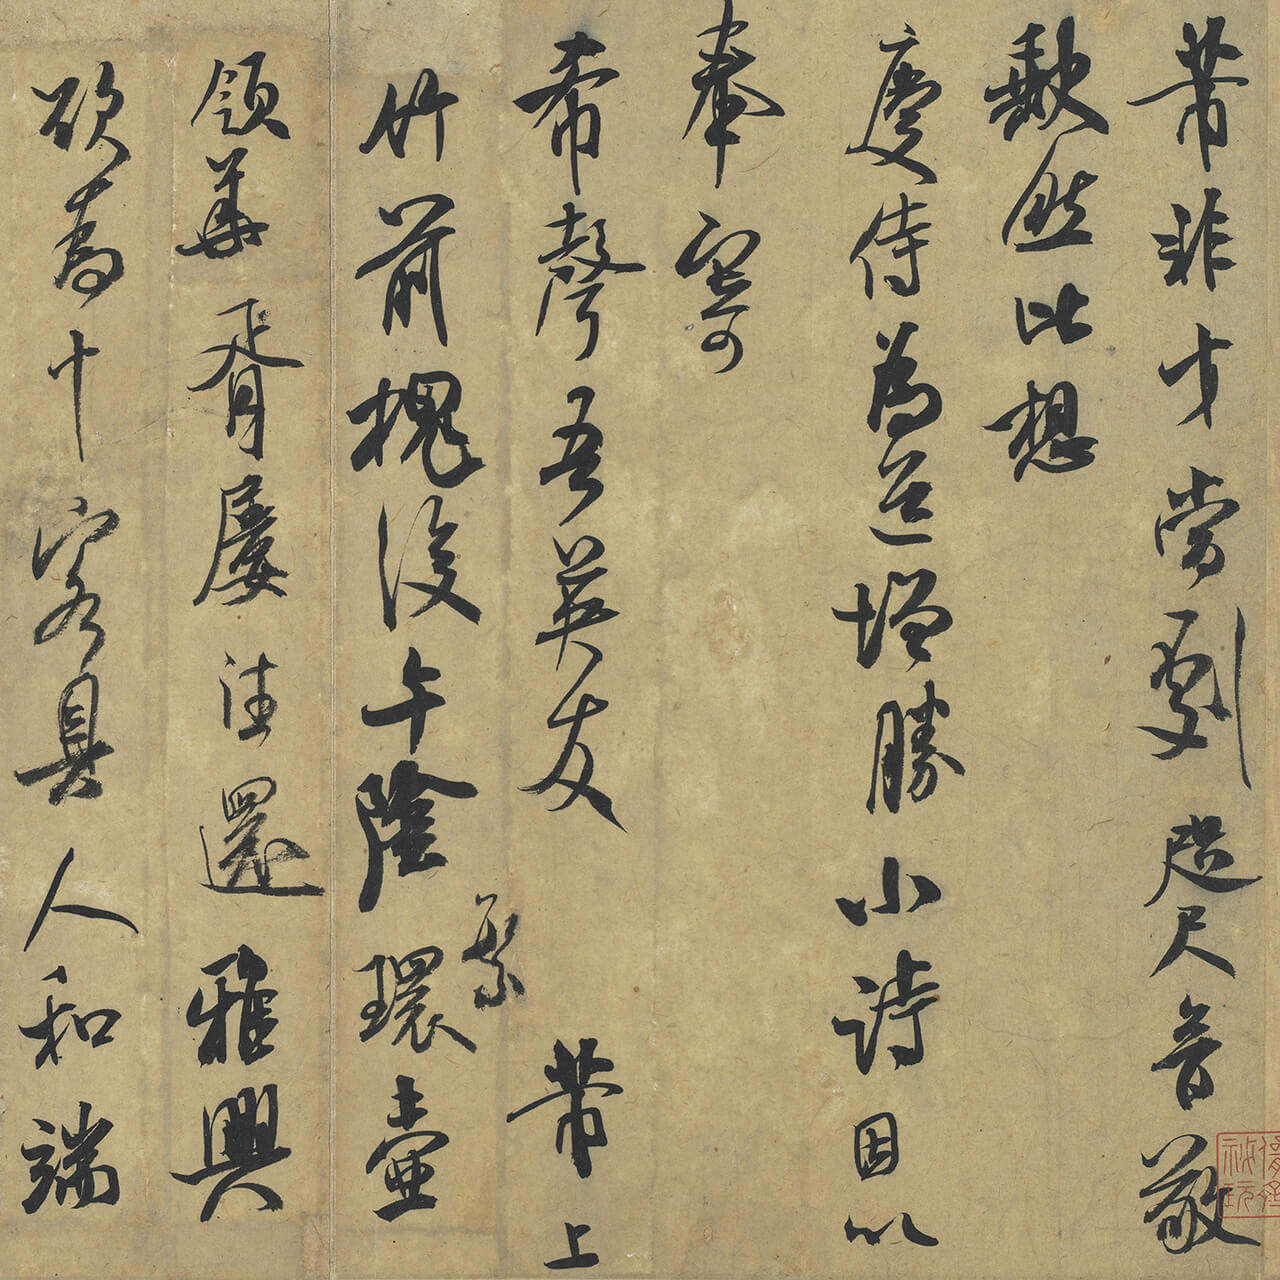  Letter to My Friend Xisheng with a Seven-character Poem